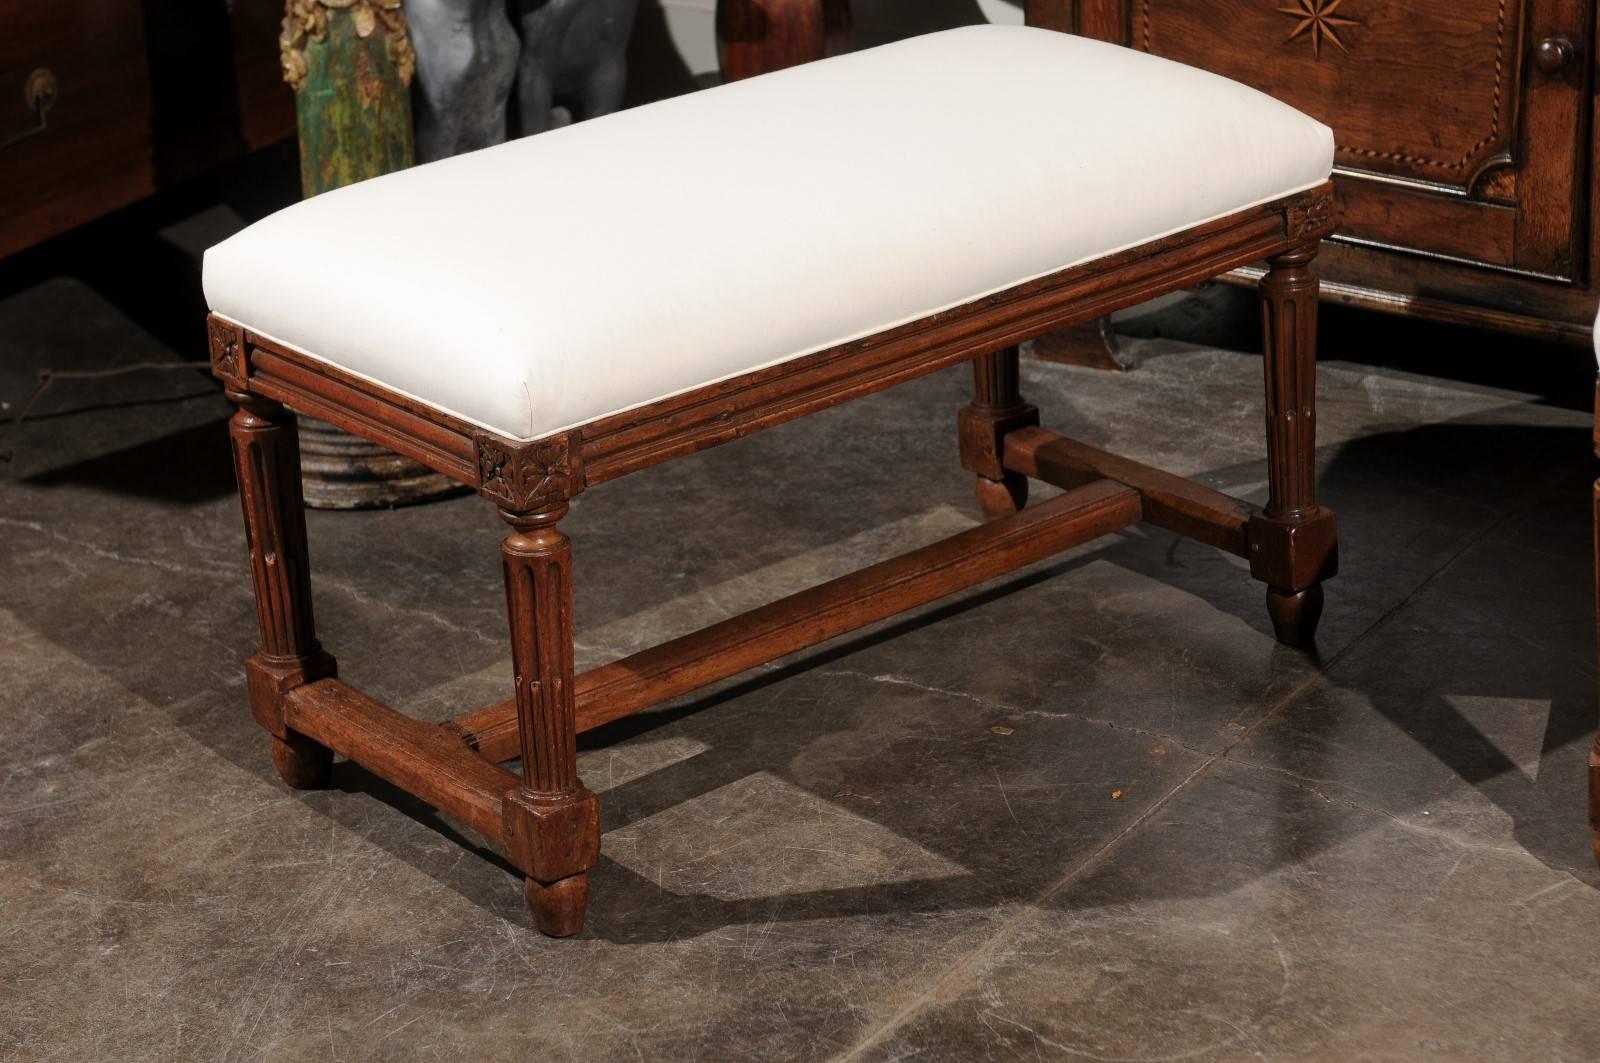 Upholstery Pair of Italian Walnut Upholstered Wooden Benches from the Early 19th Century